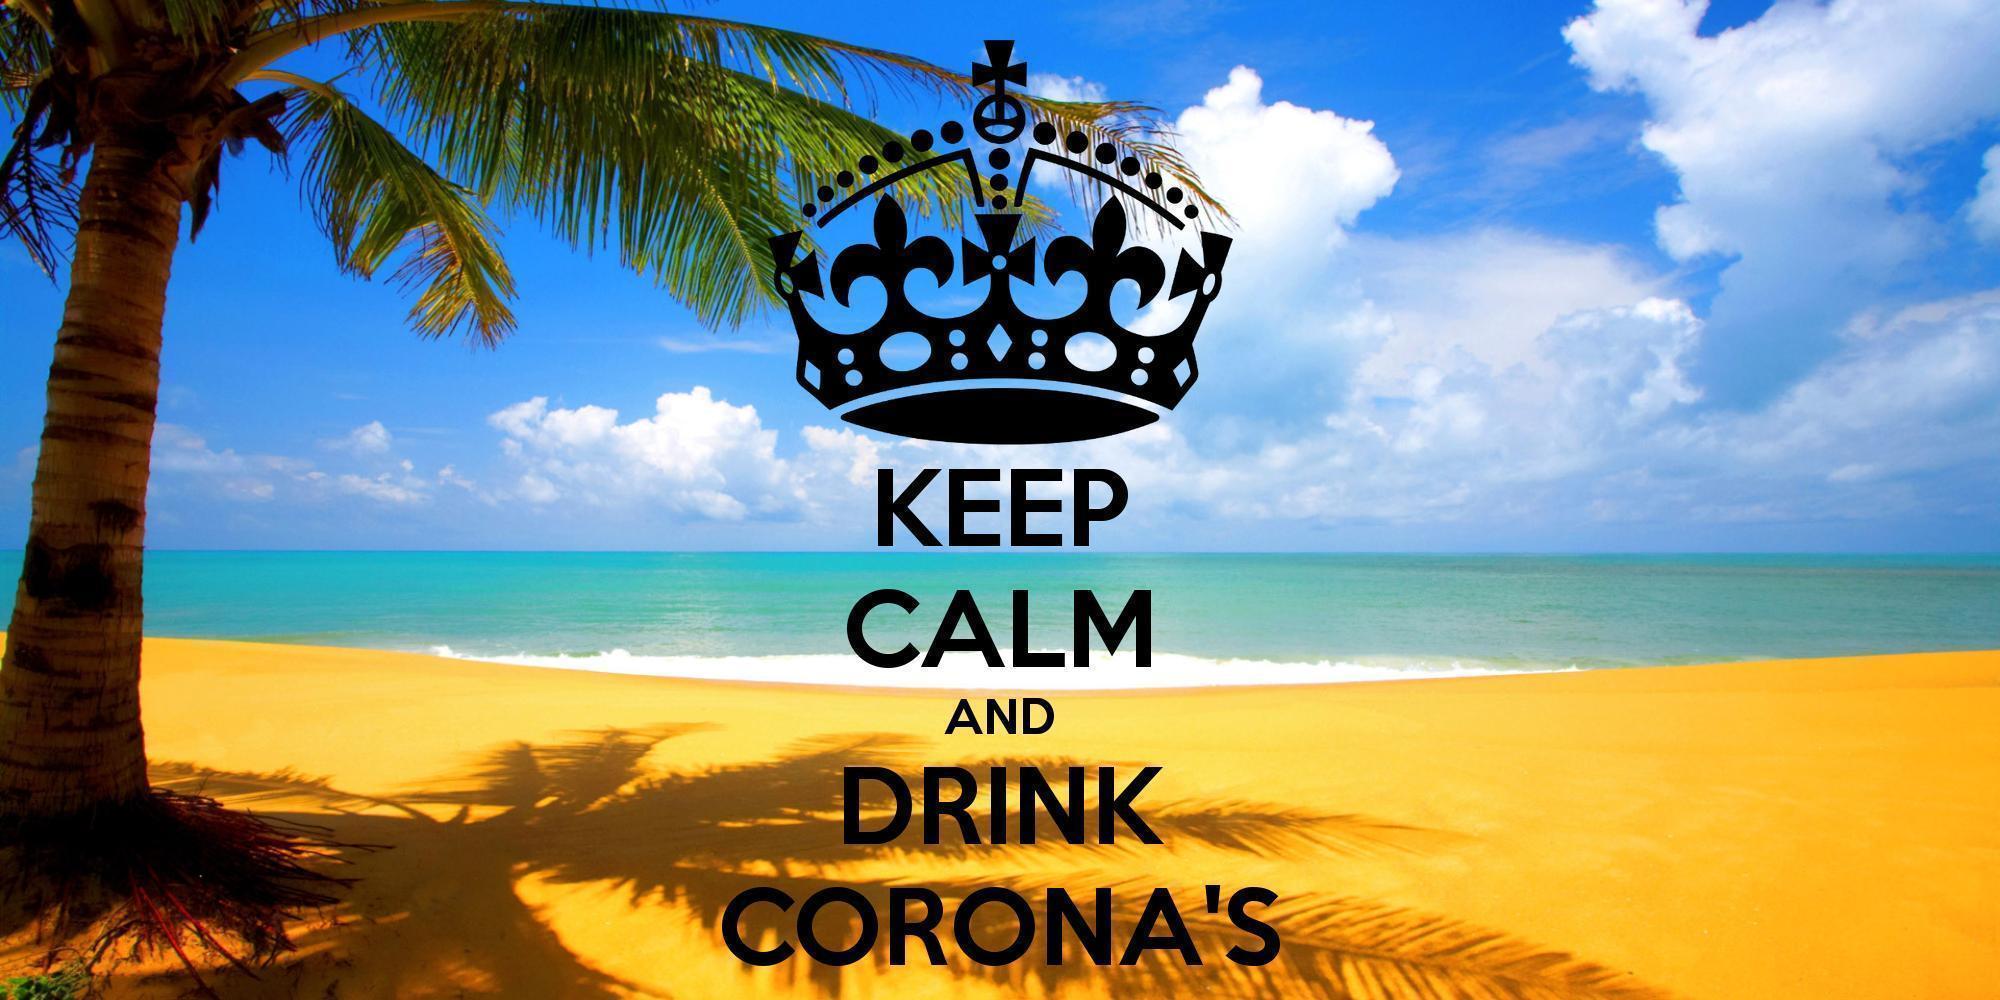 KEEP CALM AND DRINK CORONA&;S CALM AND CARRY ON Image Generator